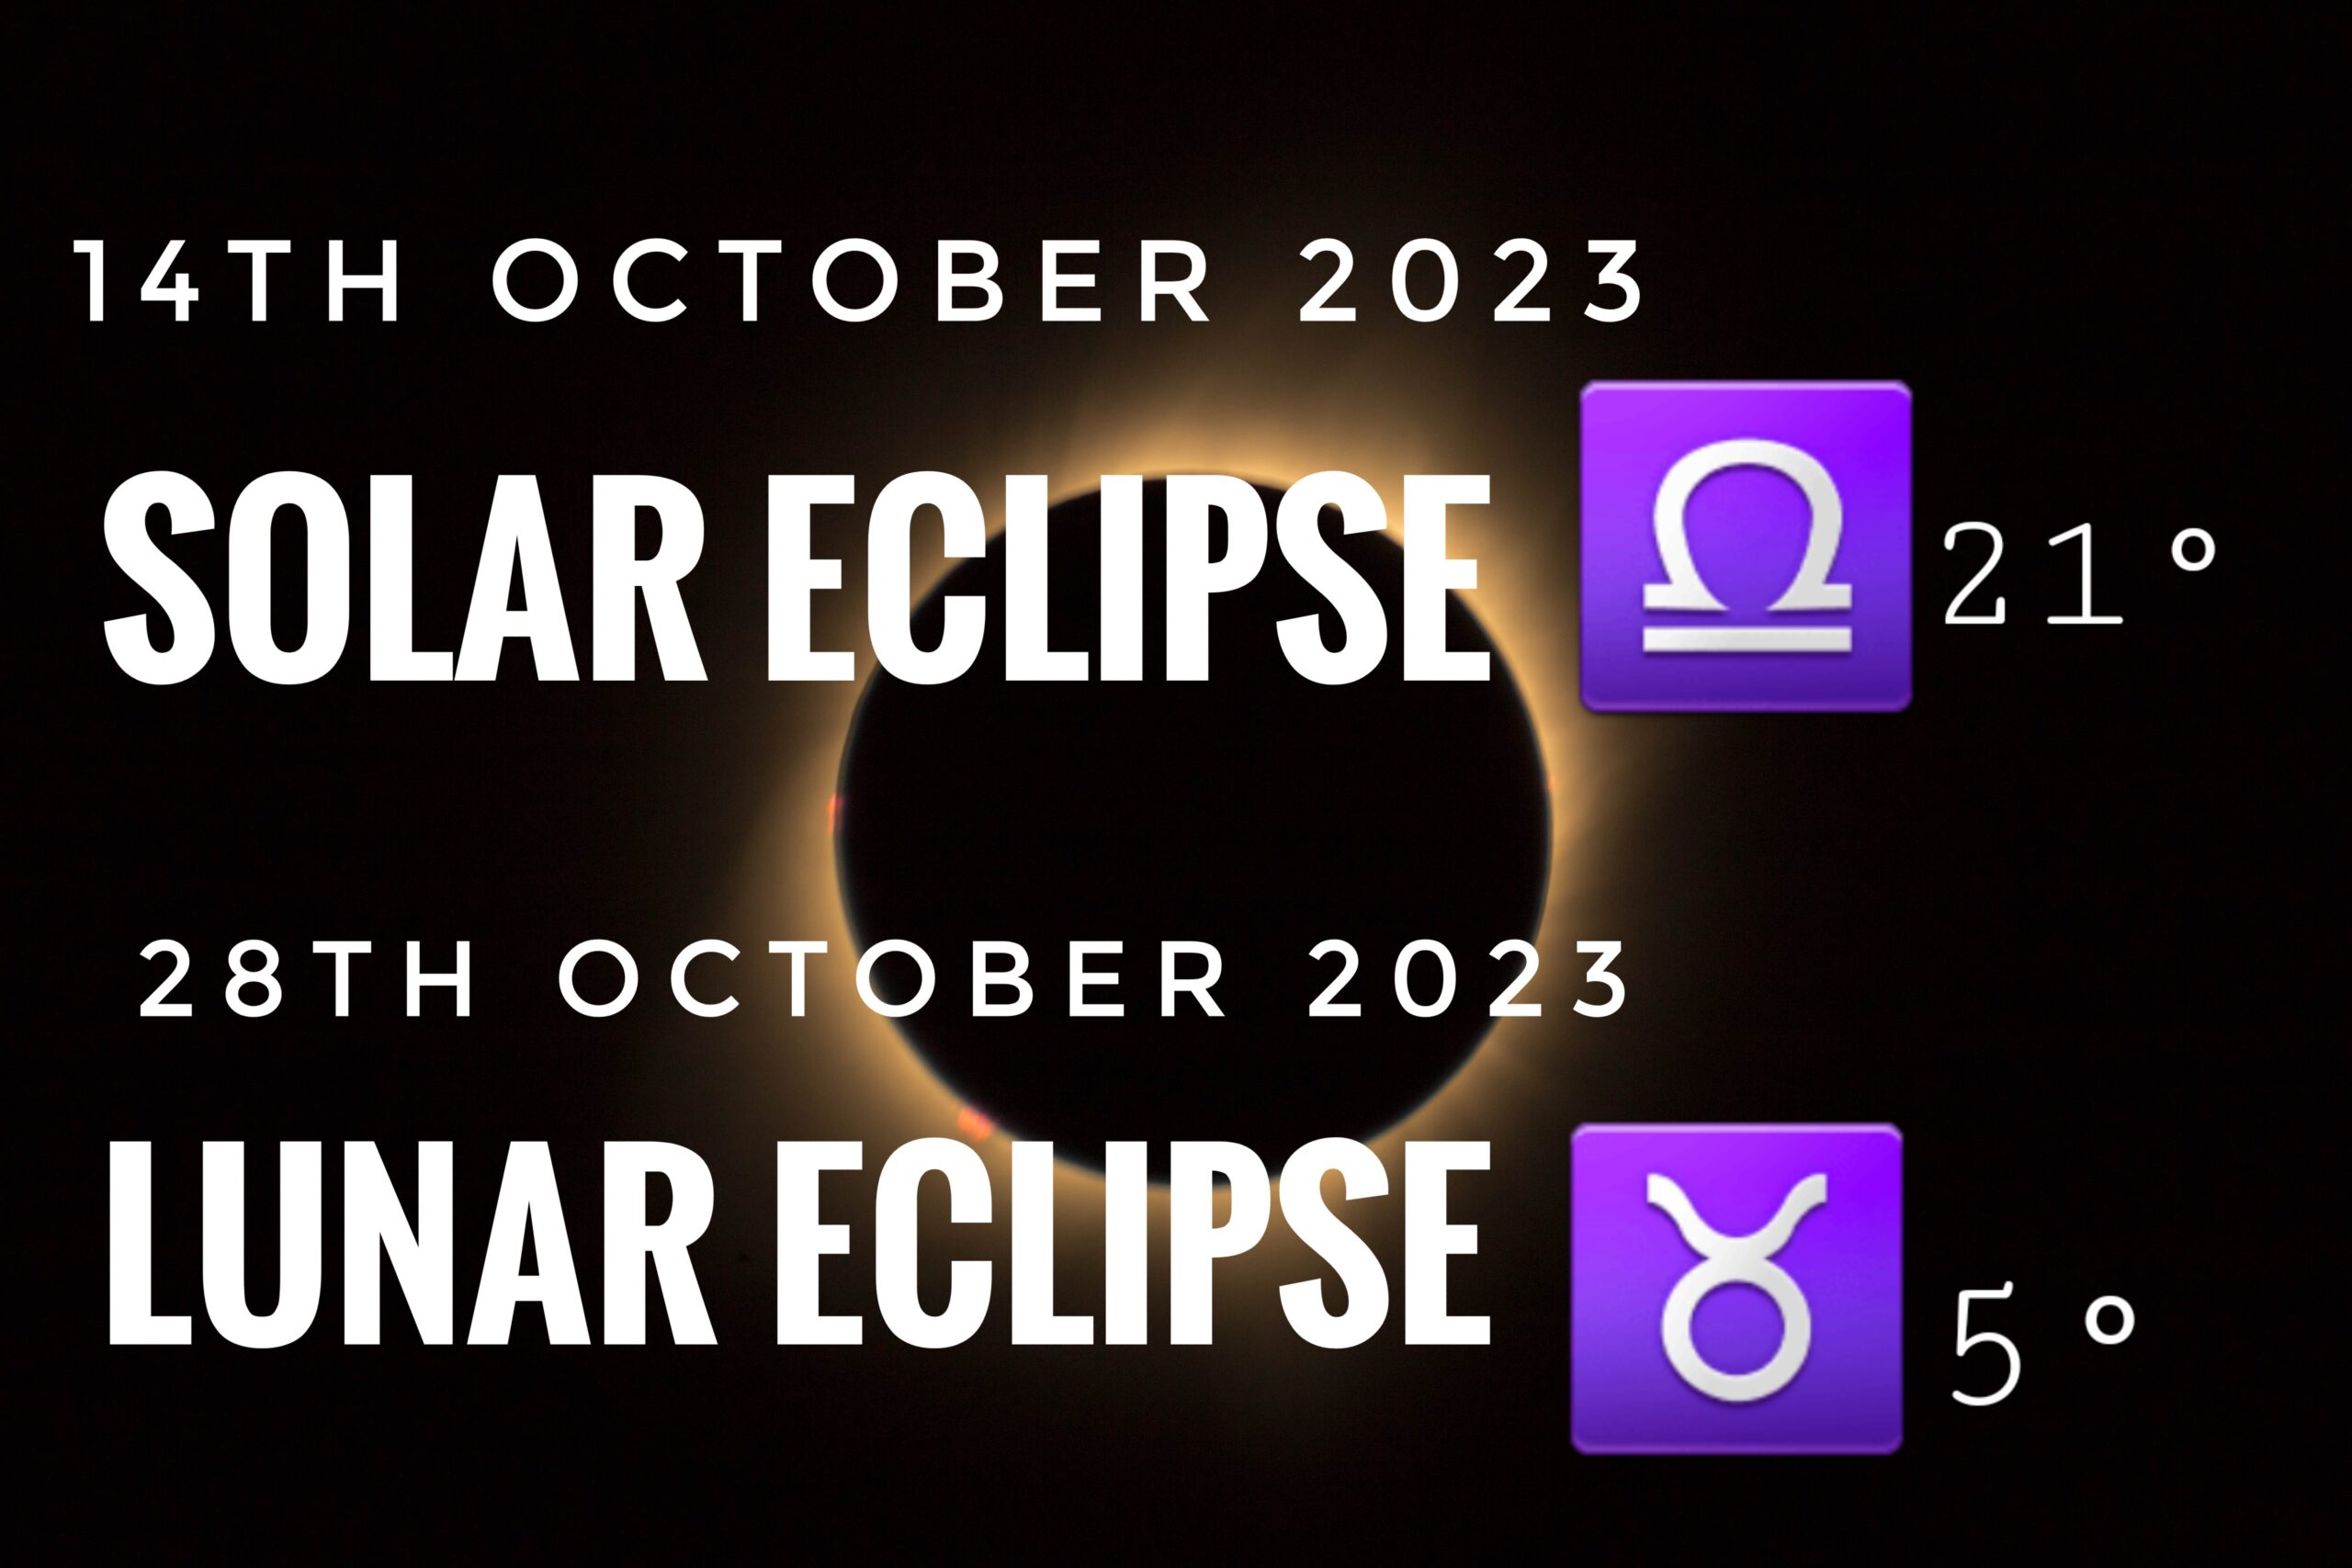 On the 14th of October 2023, a Solar Eclipse will occur in the zodiac sign of Libra. This will be followed by a Lunar Eclipse on the 28th of October 2023, which will take place in Taurus. 